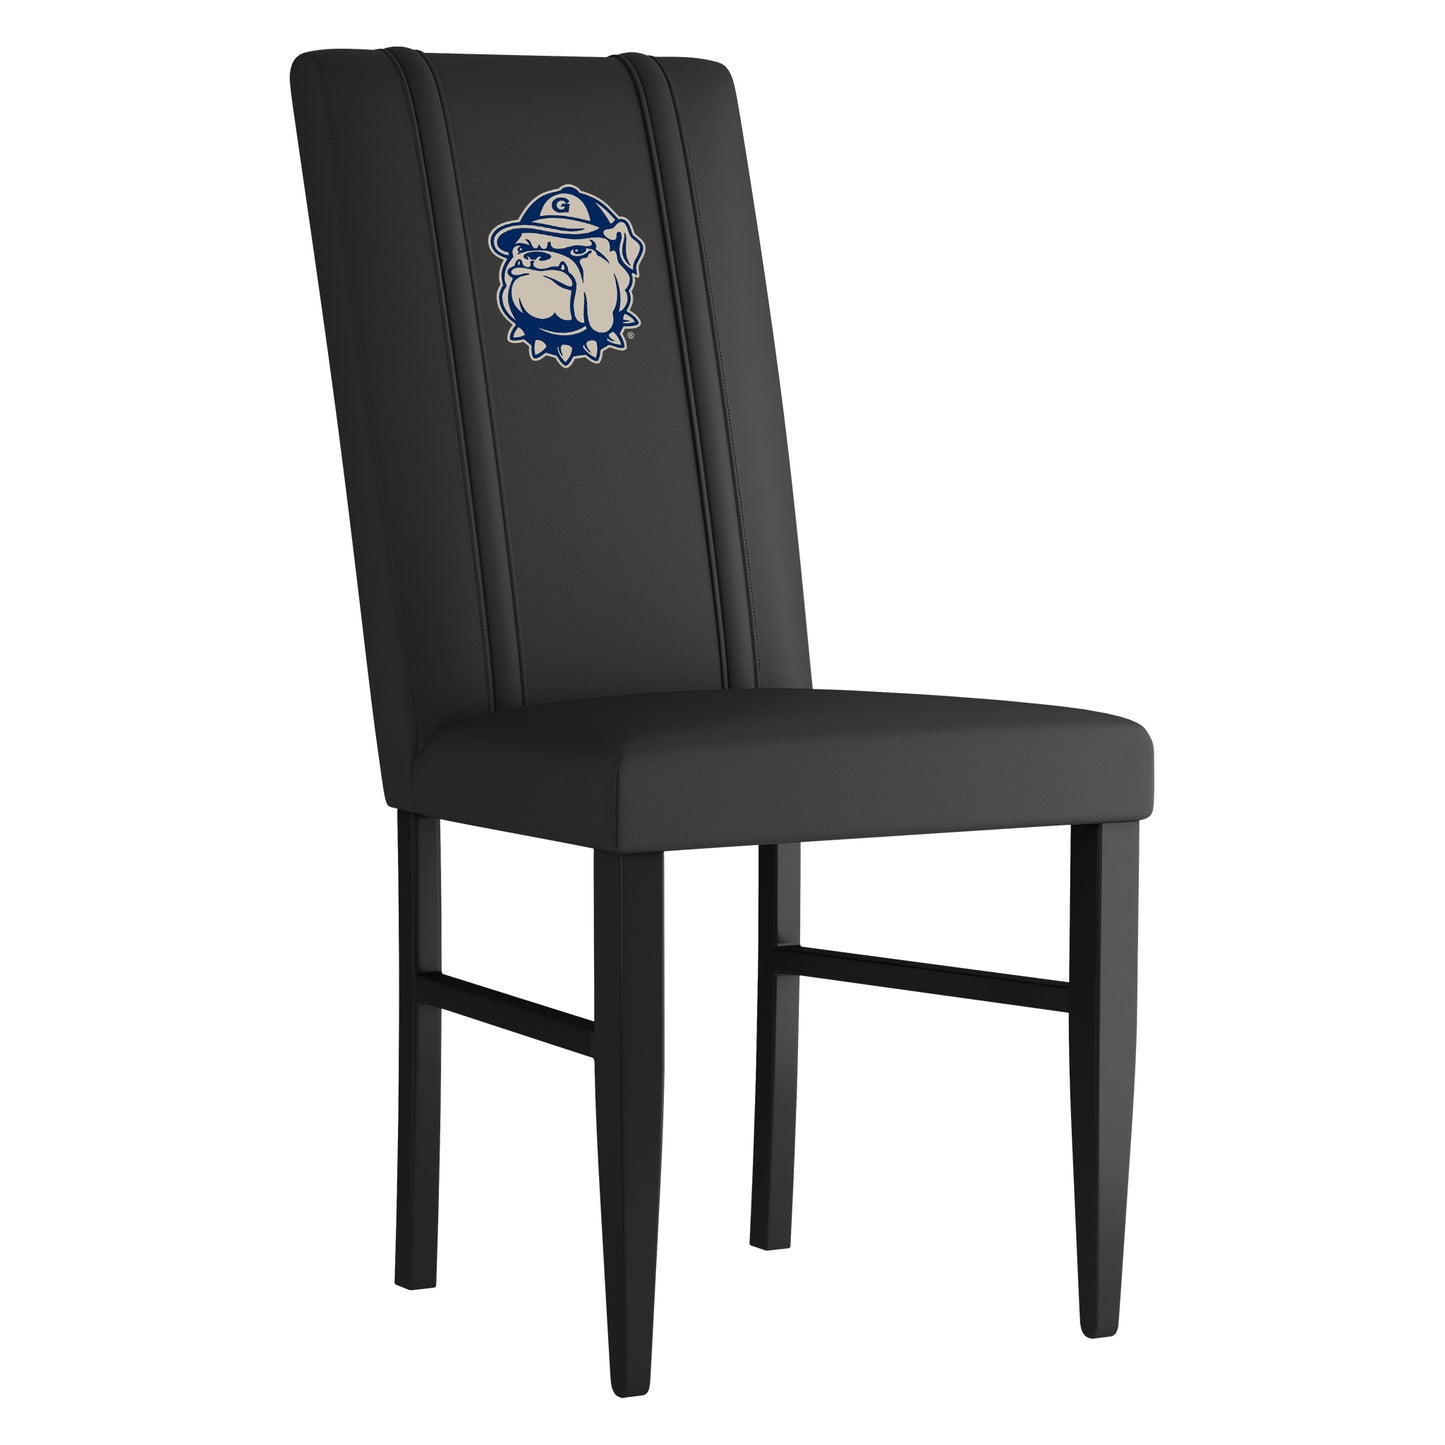 Side Chair 2000 with Georgetown Hoyas Secondary Set of 2